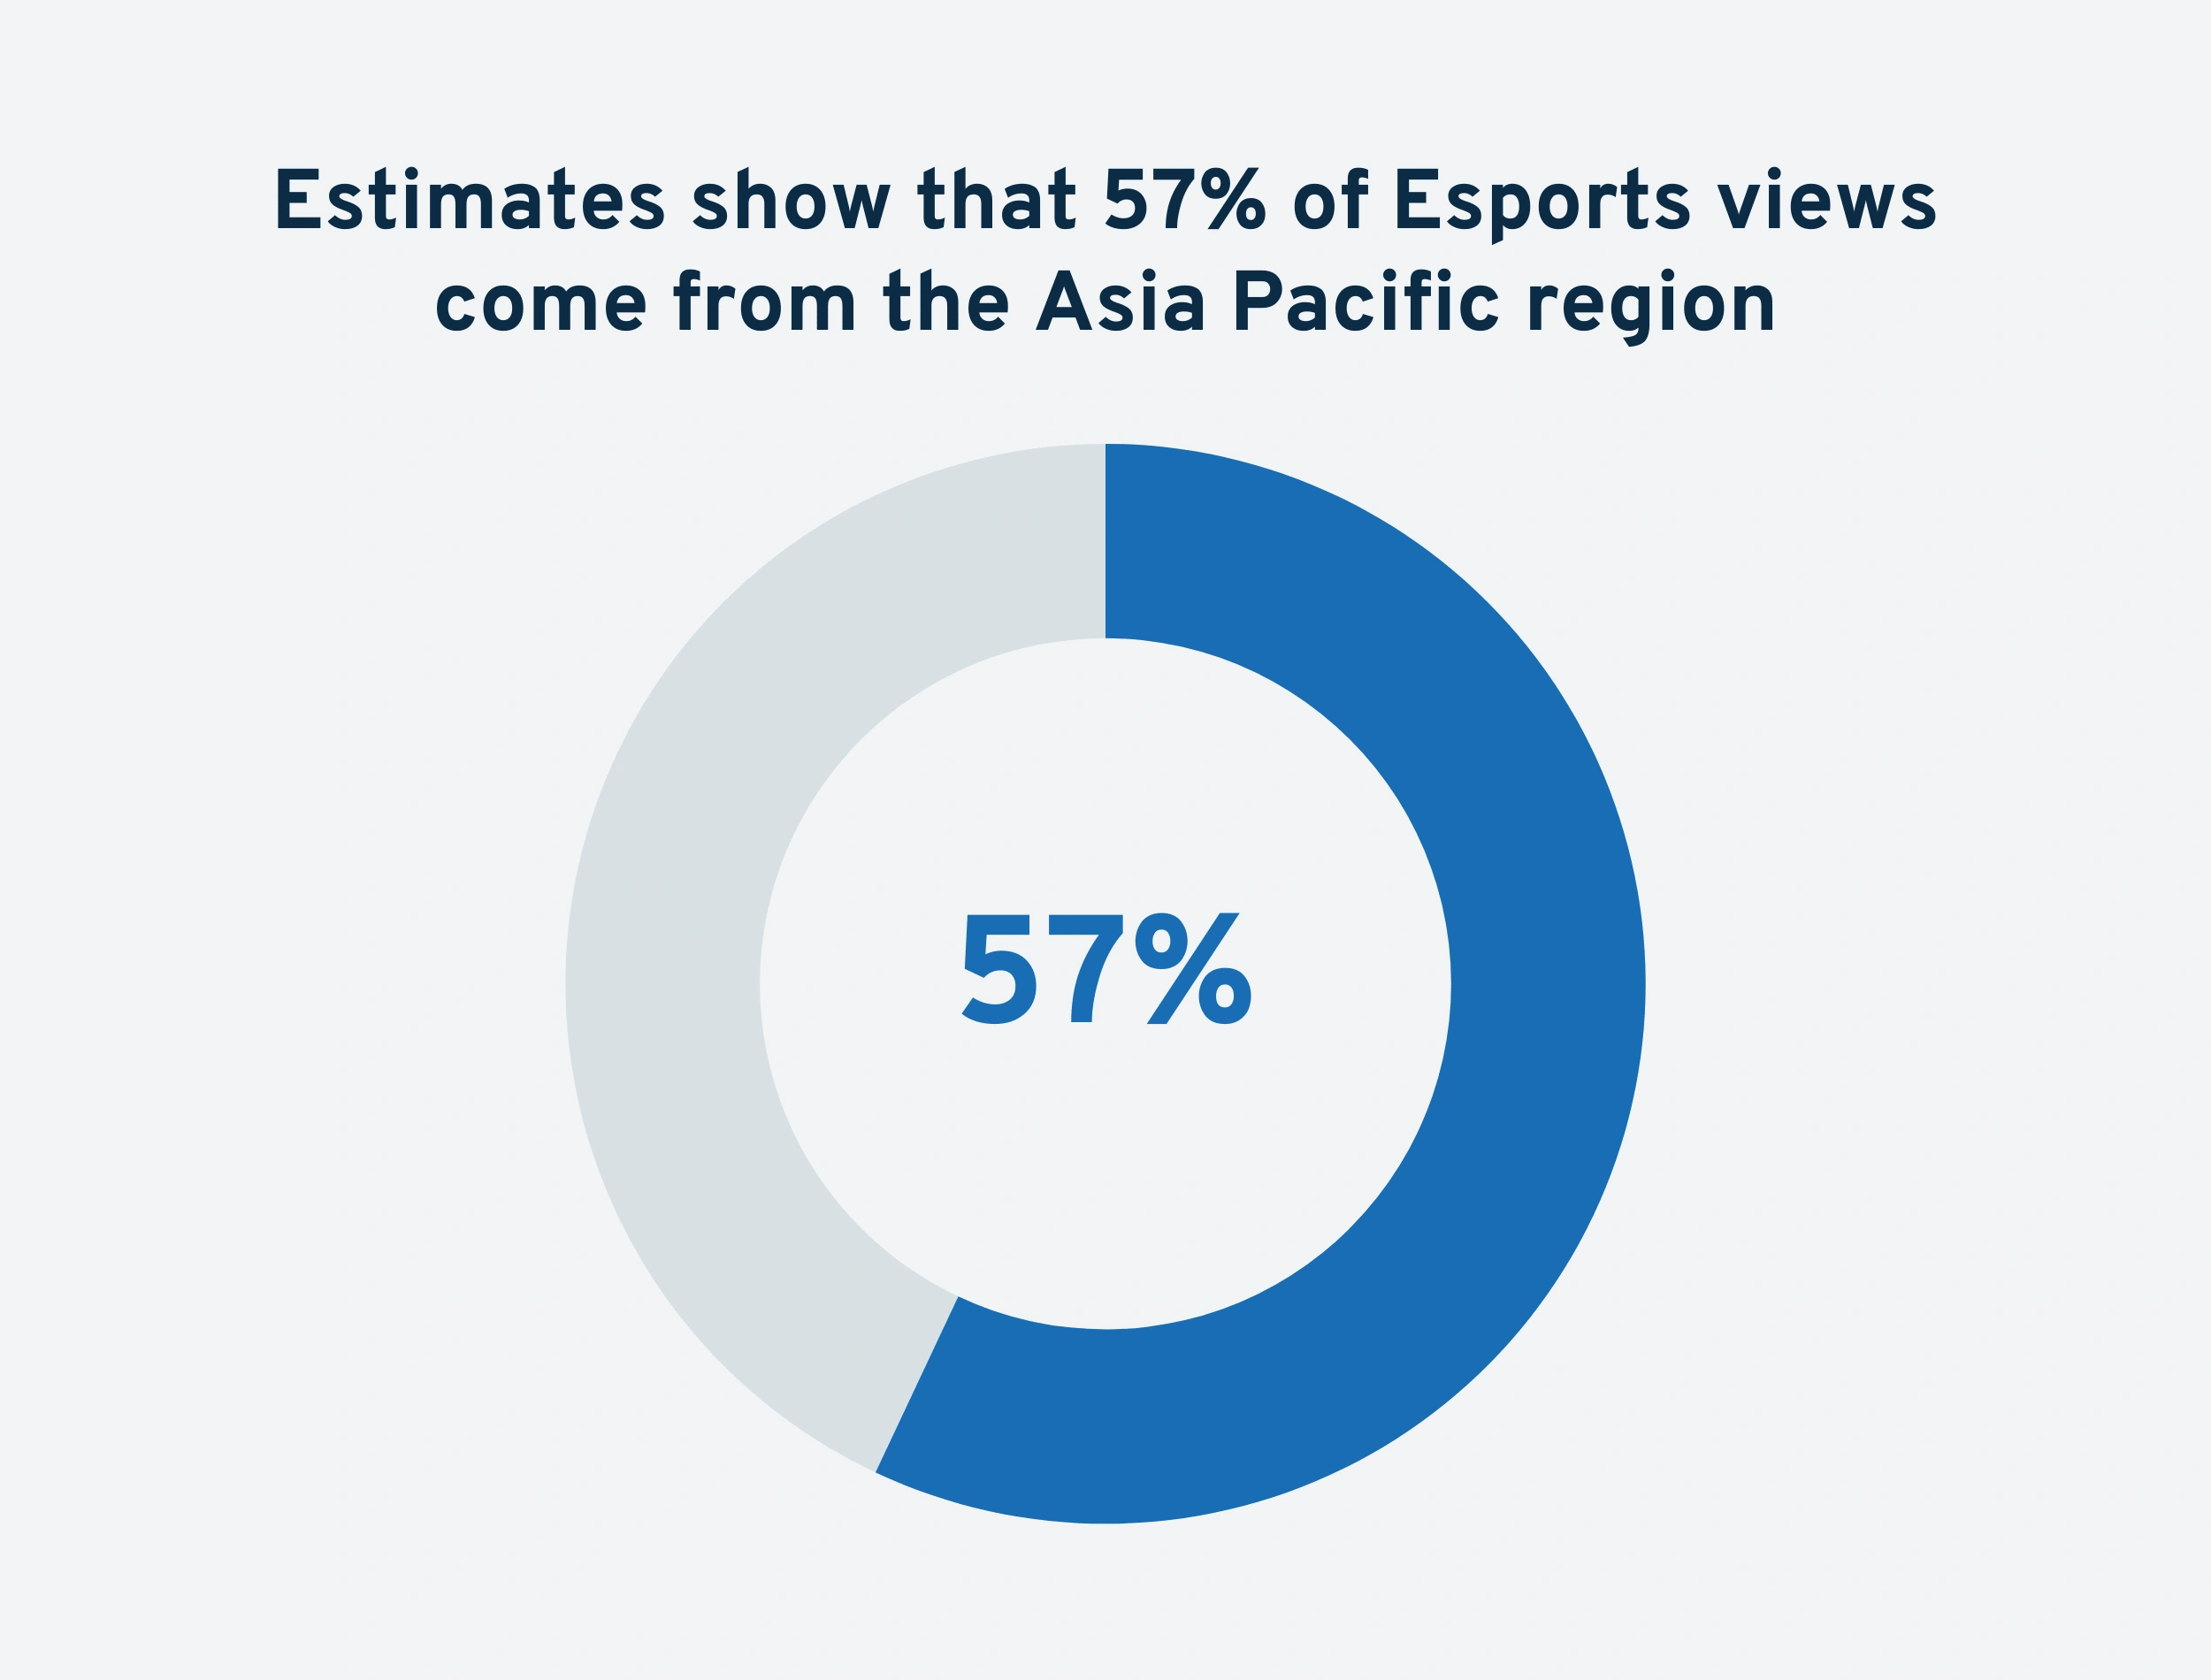 asia-pacific-esports-views-min.png